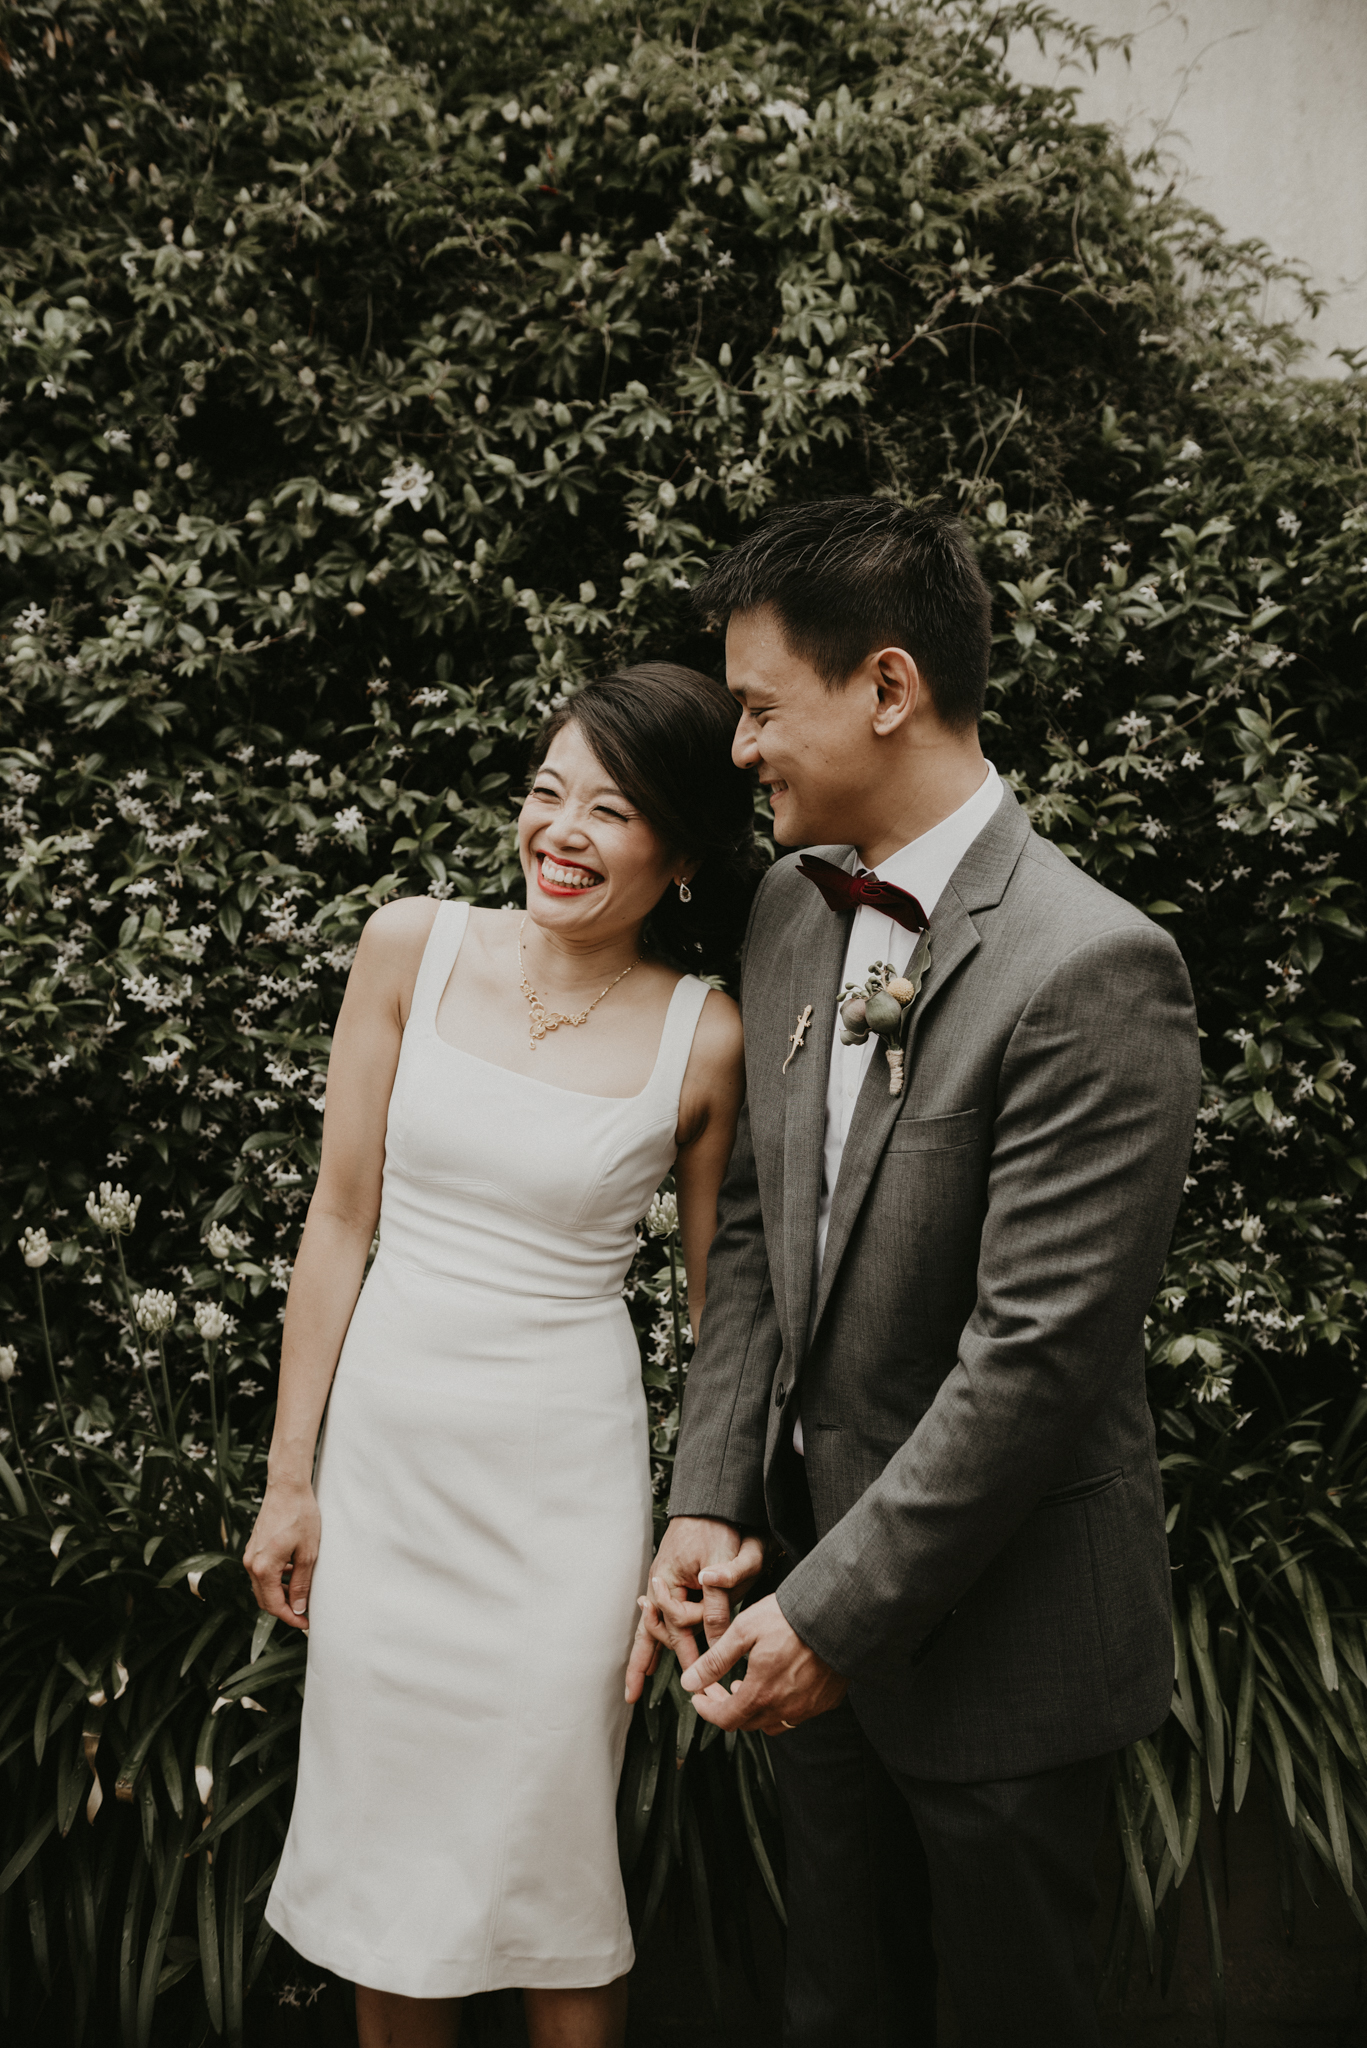 agnes-duy-15th-december-2018-chinese-vietnamese-wedding-tea-ceremony-yarraville-home-house-documentary-candid-photographer-sarah-matler-photography-74